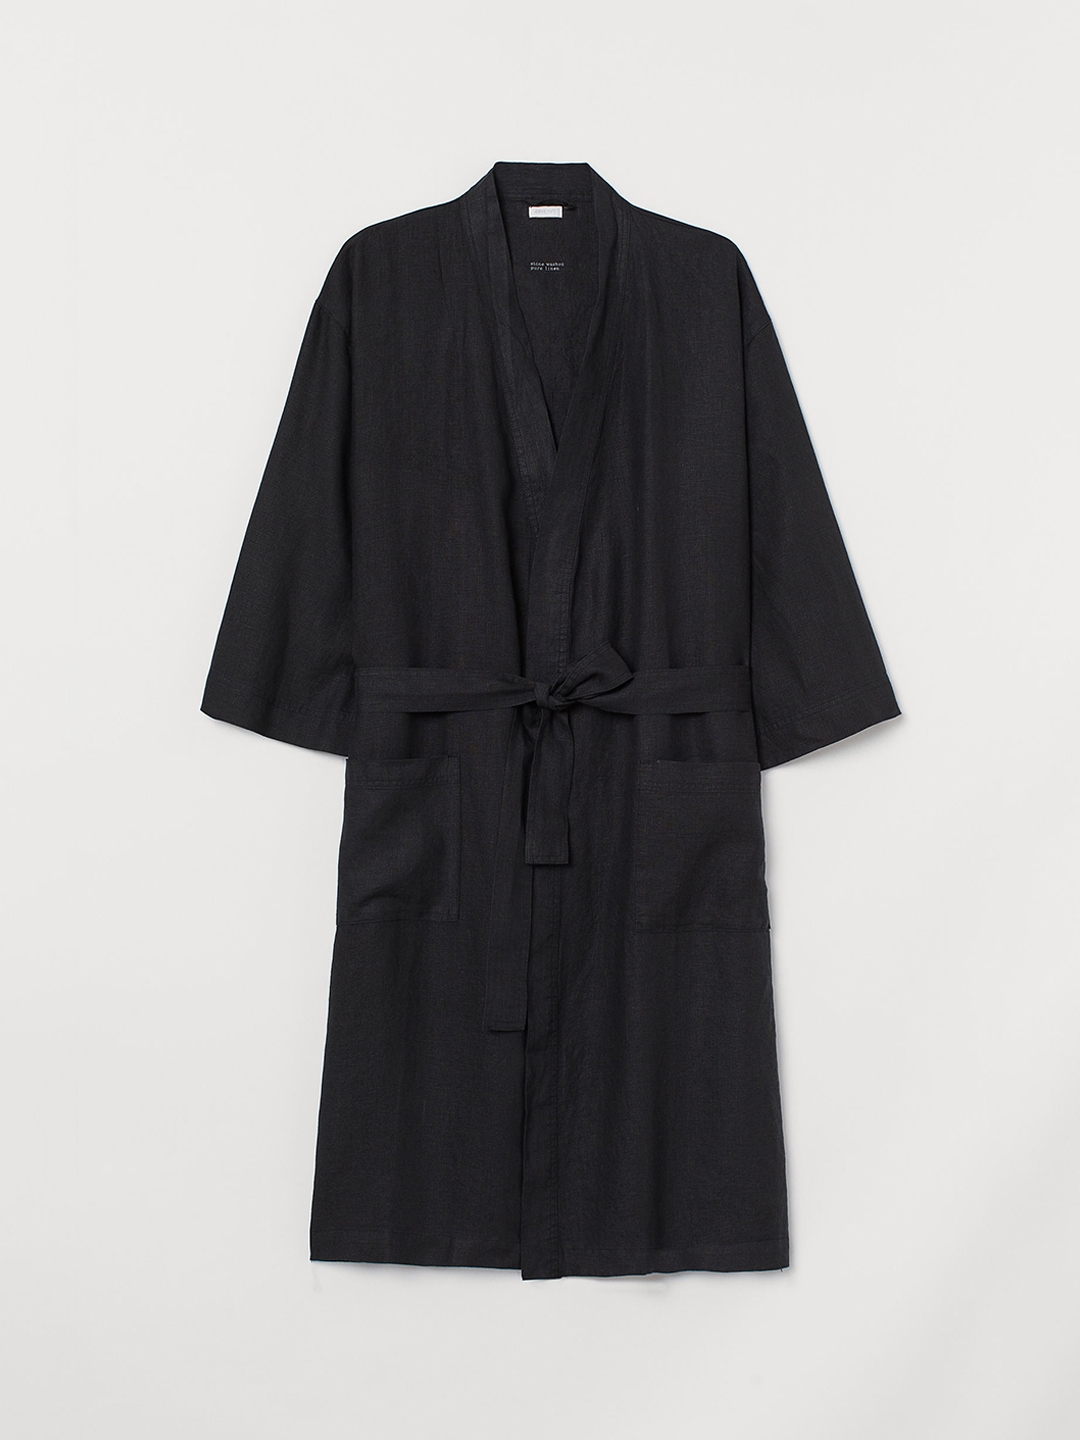 Buy H&M Unisex Black Washed Linen Dressing Gown - Robe for Unisex ...